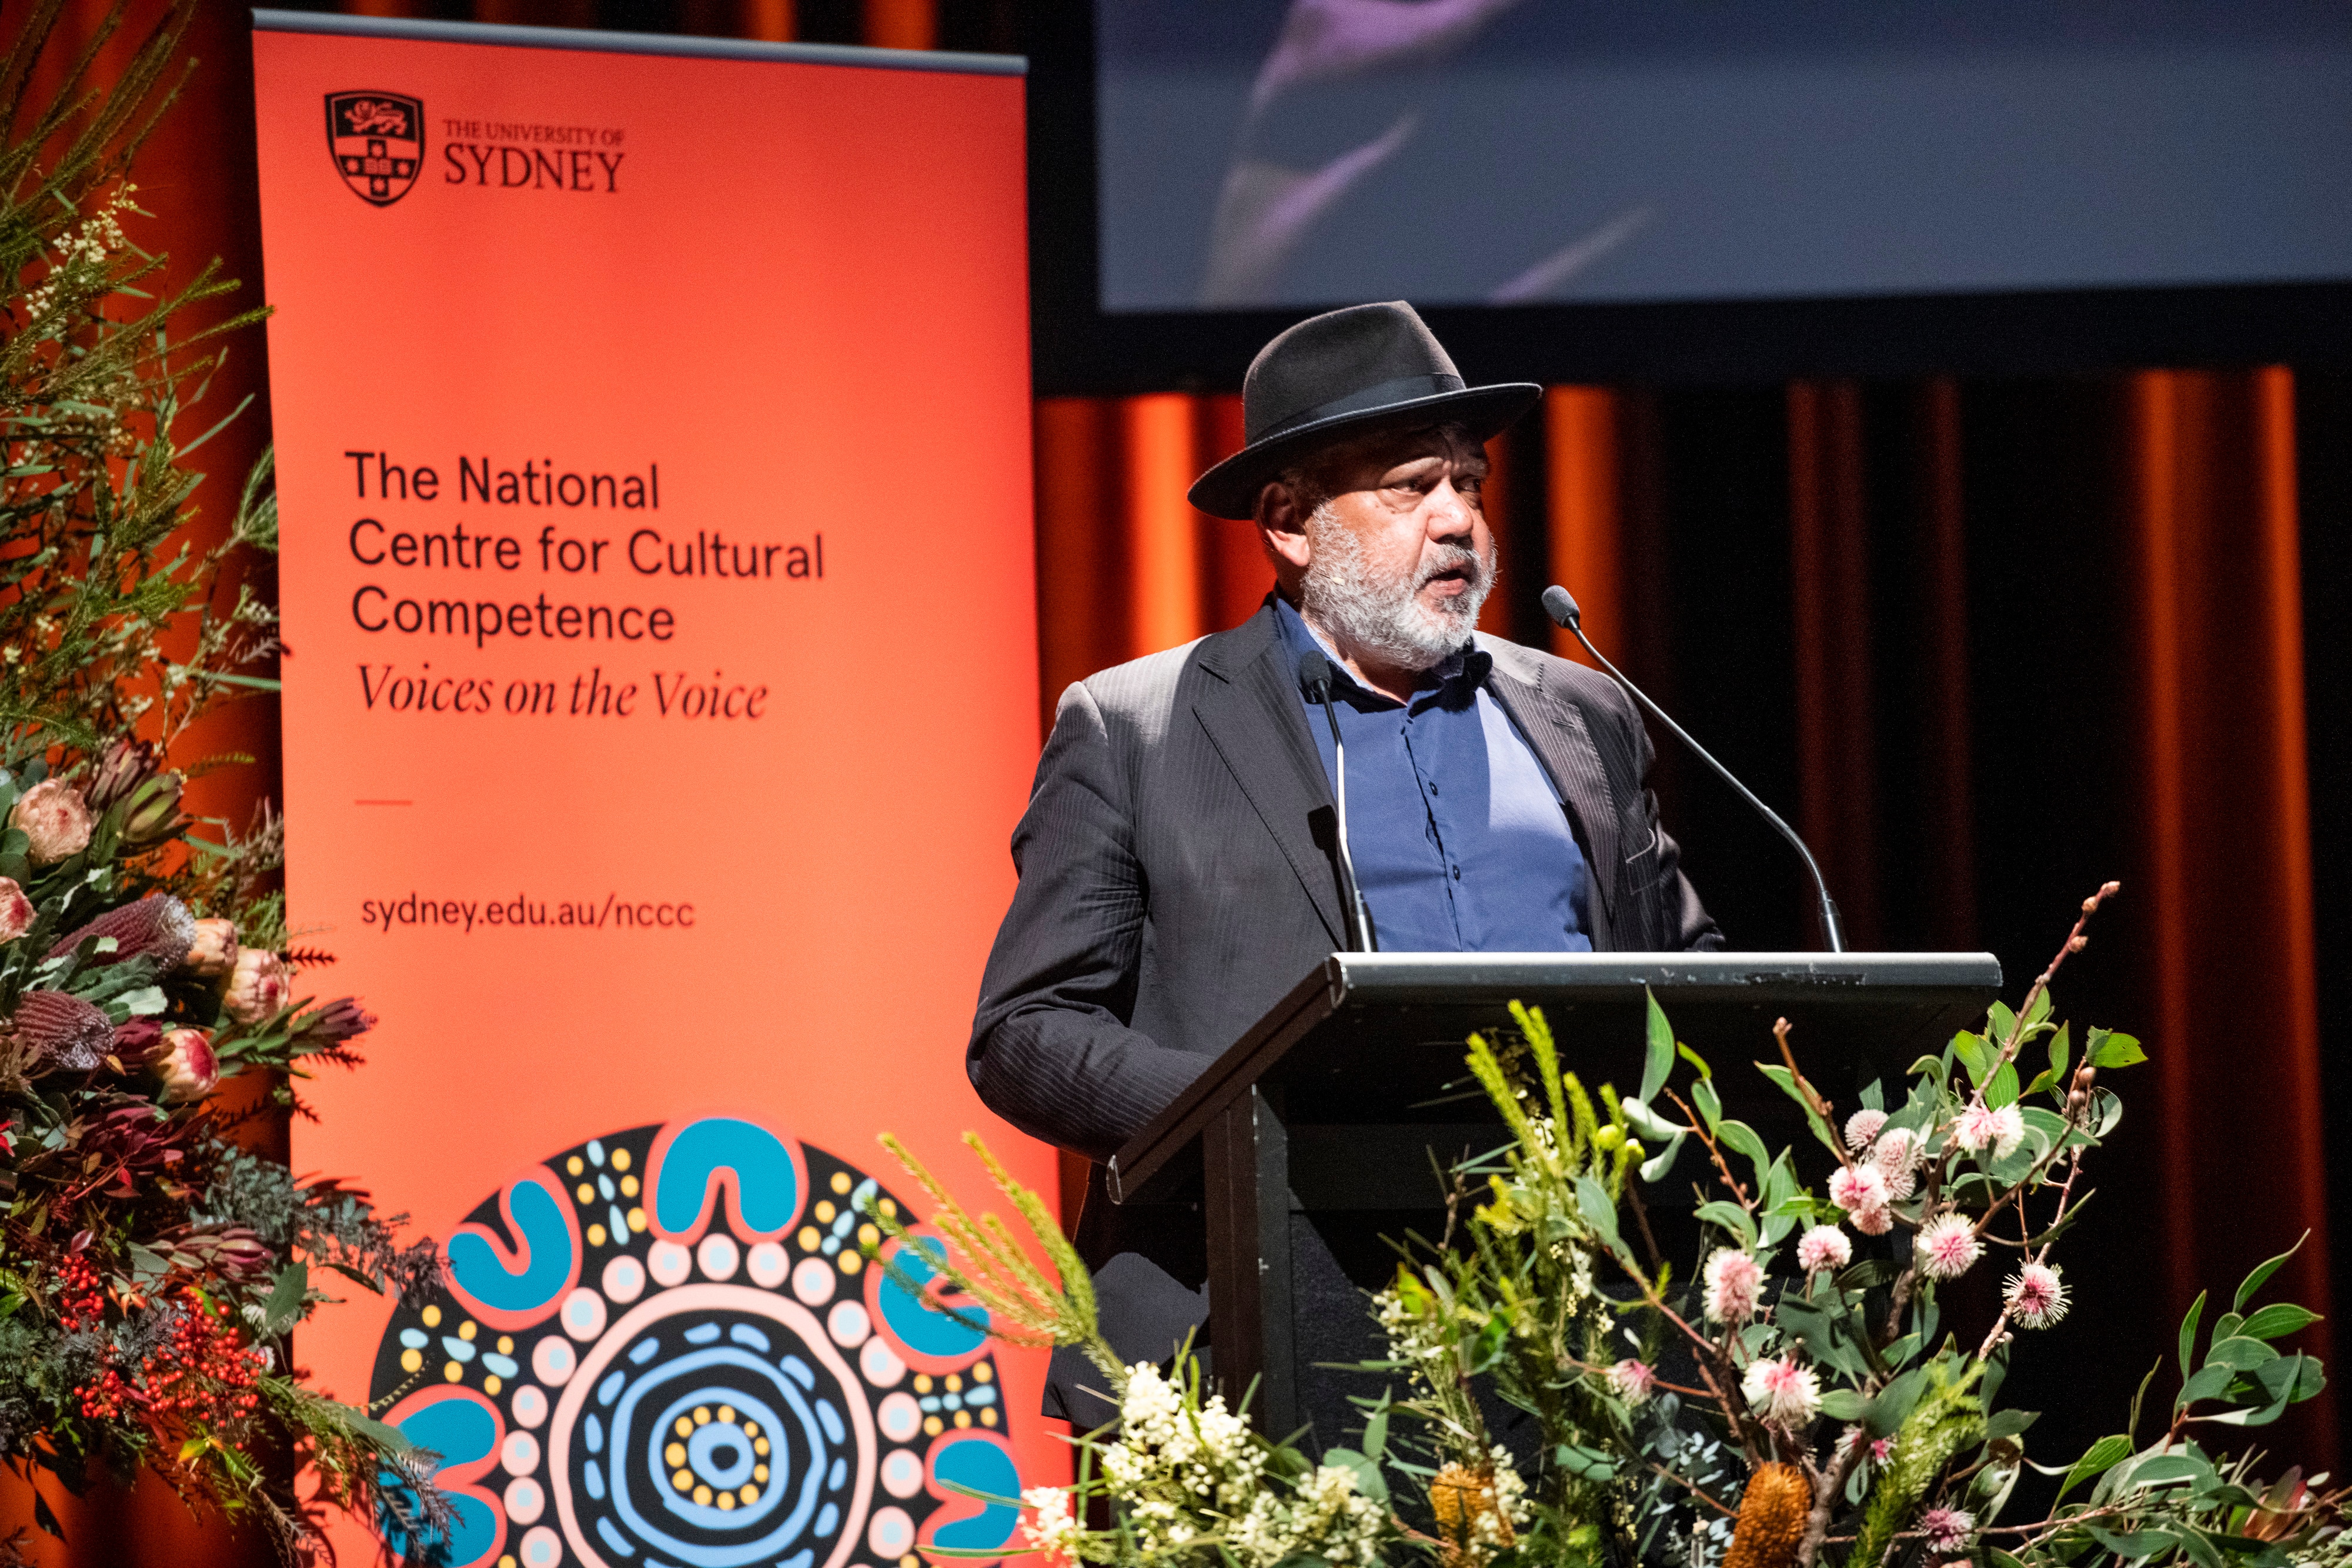 The Voice is about ‘integration not separatism’ says Noel Pearson